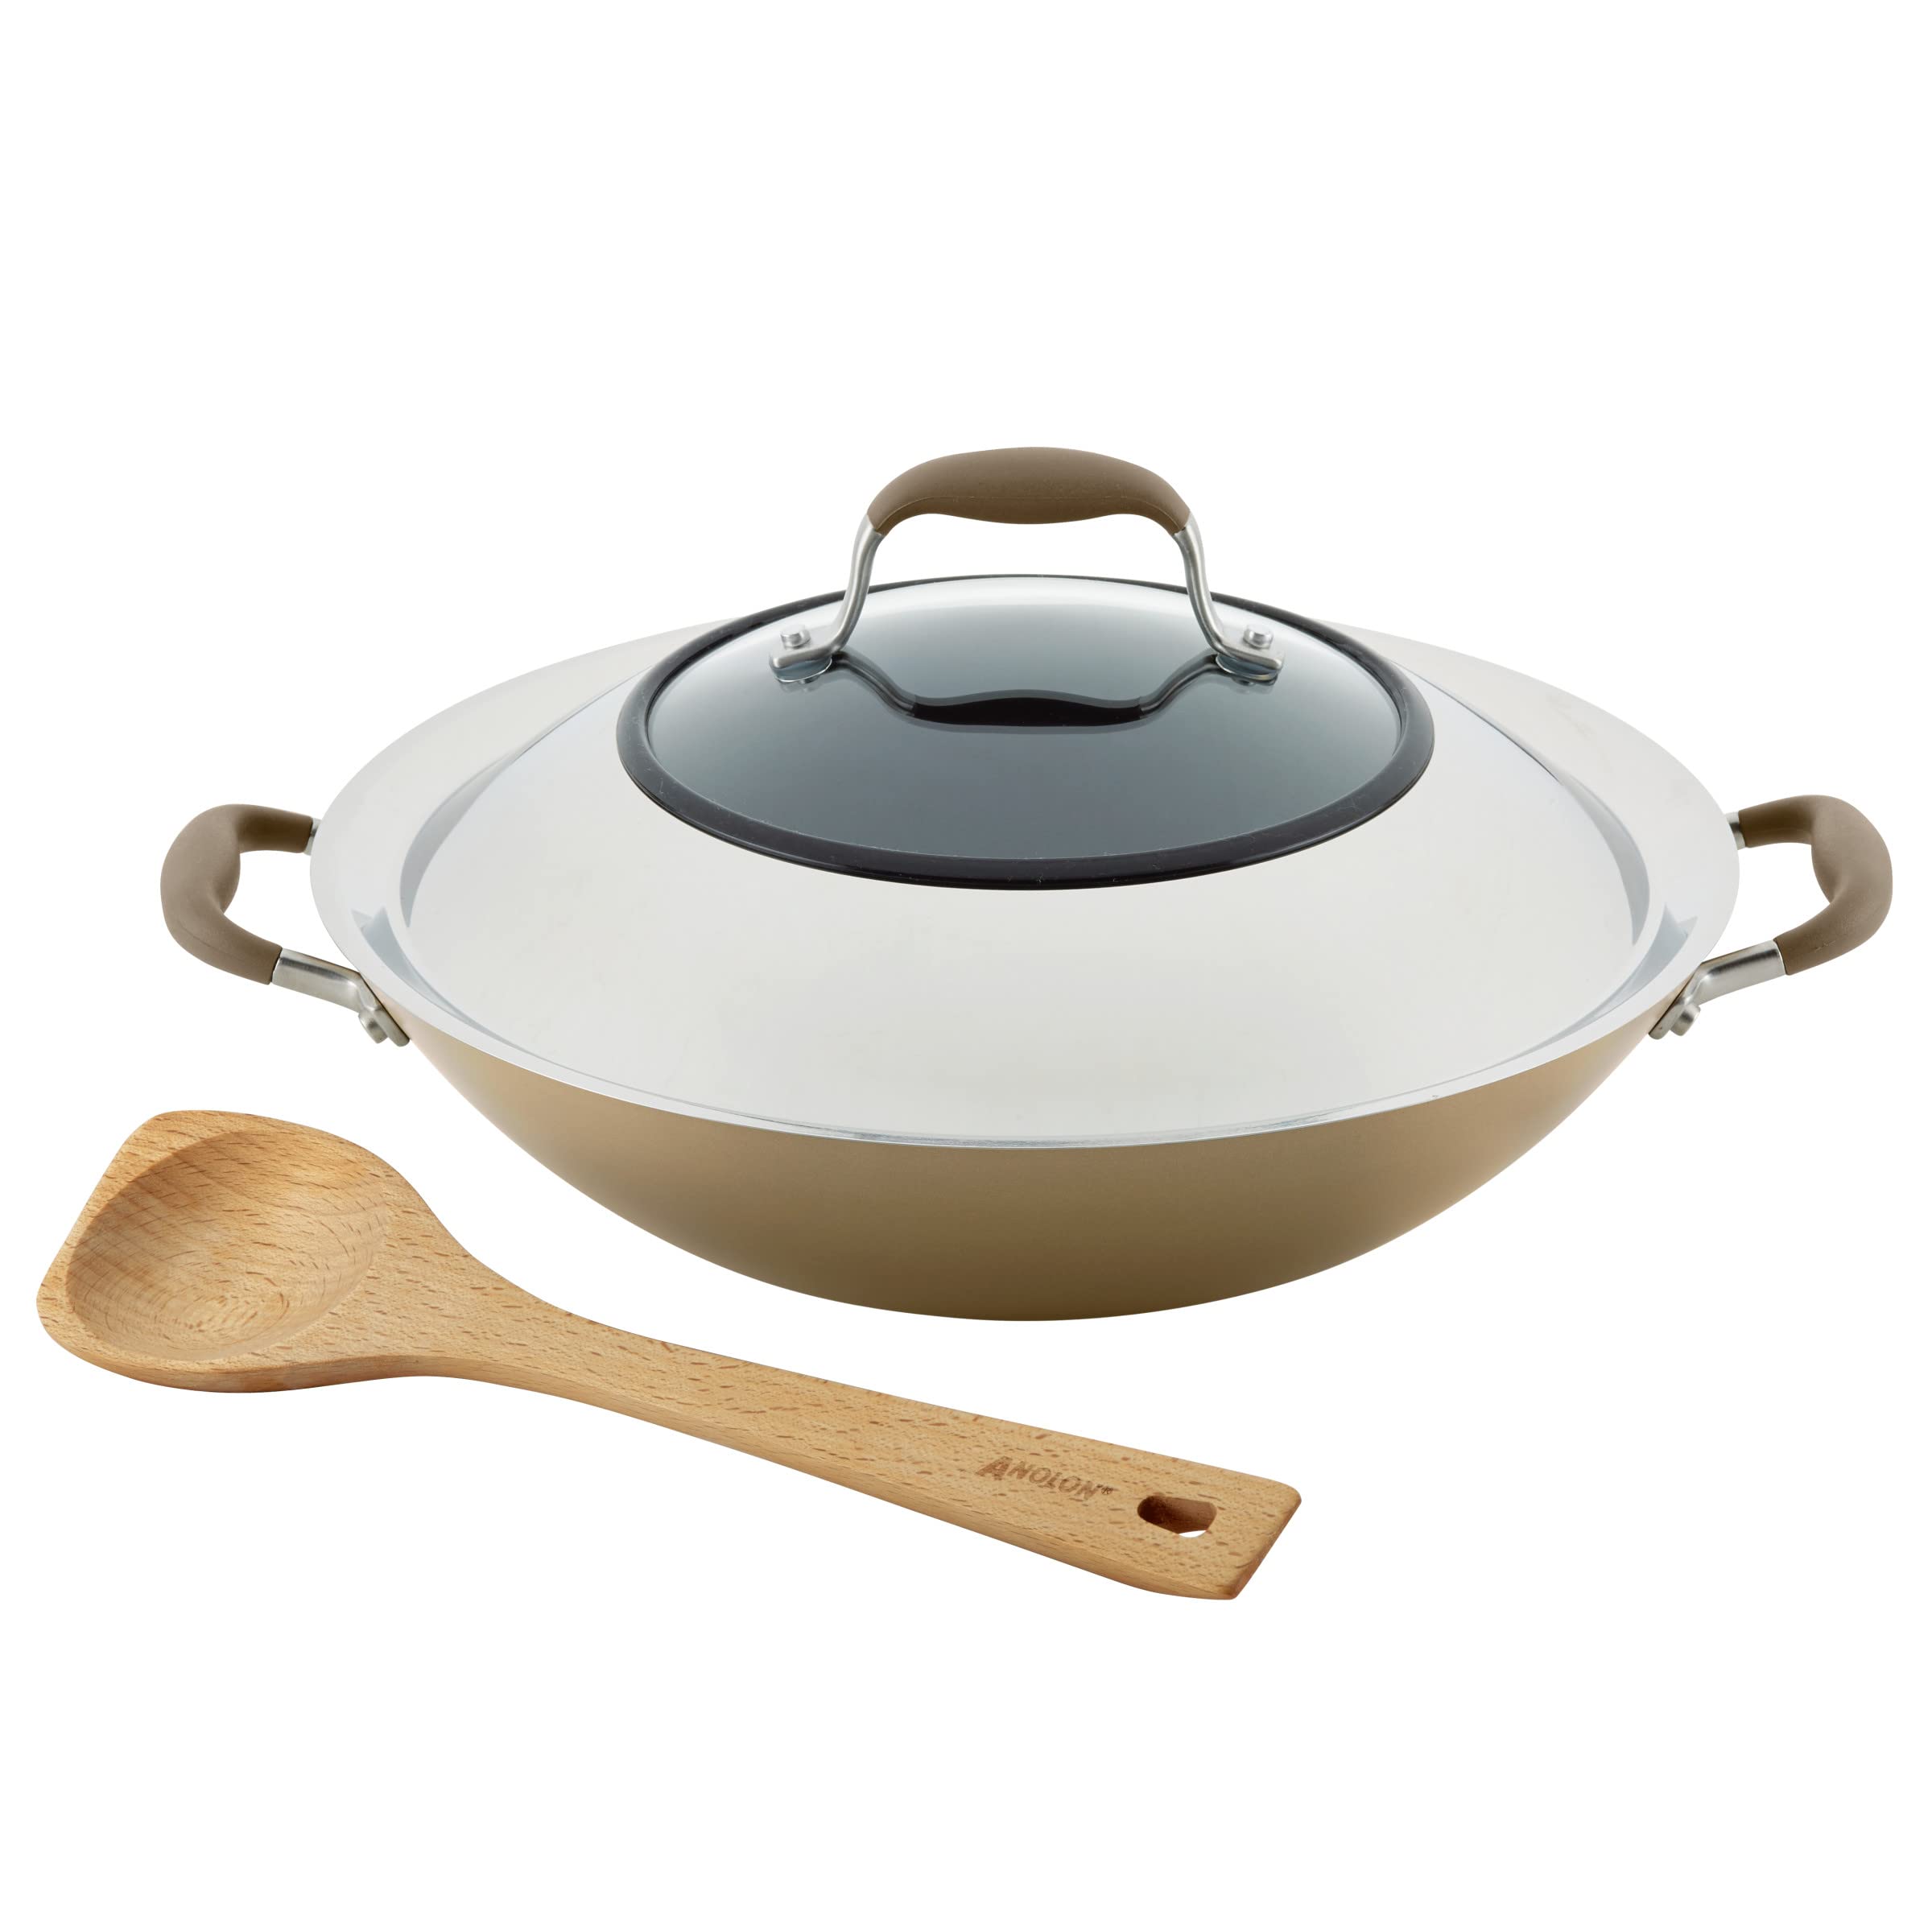 Anolon Advanced Home Hard Anodized Nonstick Wok/Stir Fry with Lid and Cooking Tool, 14 Inch, Bronze